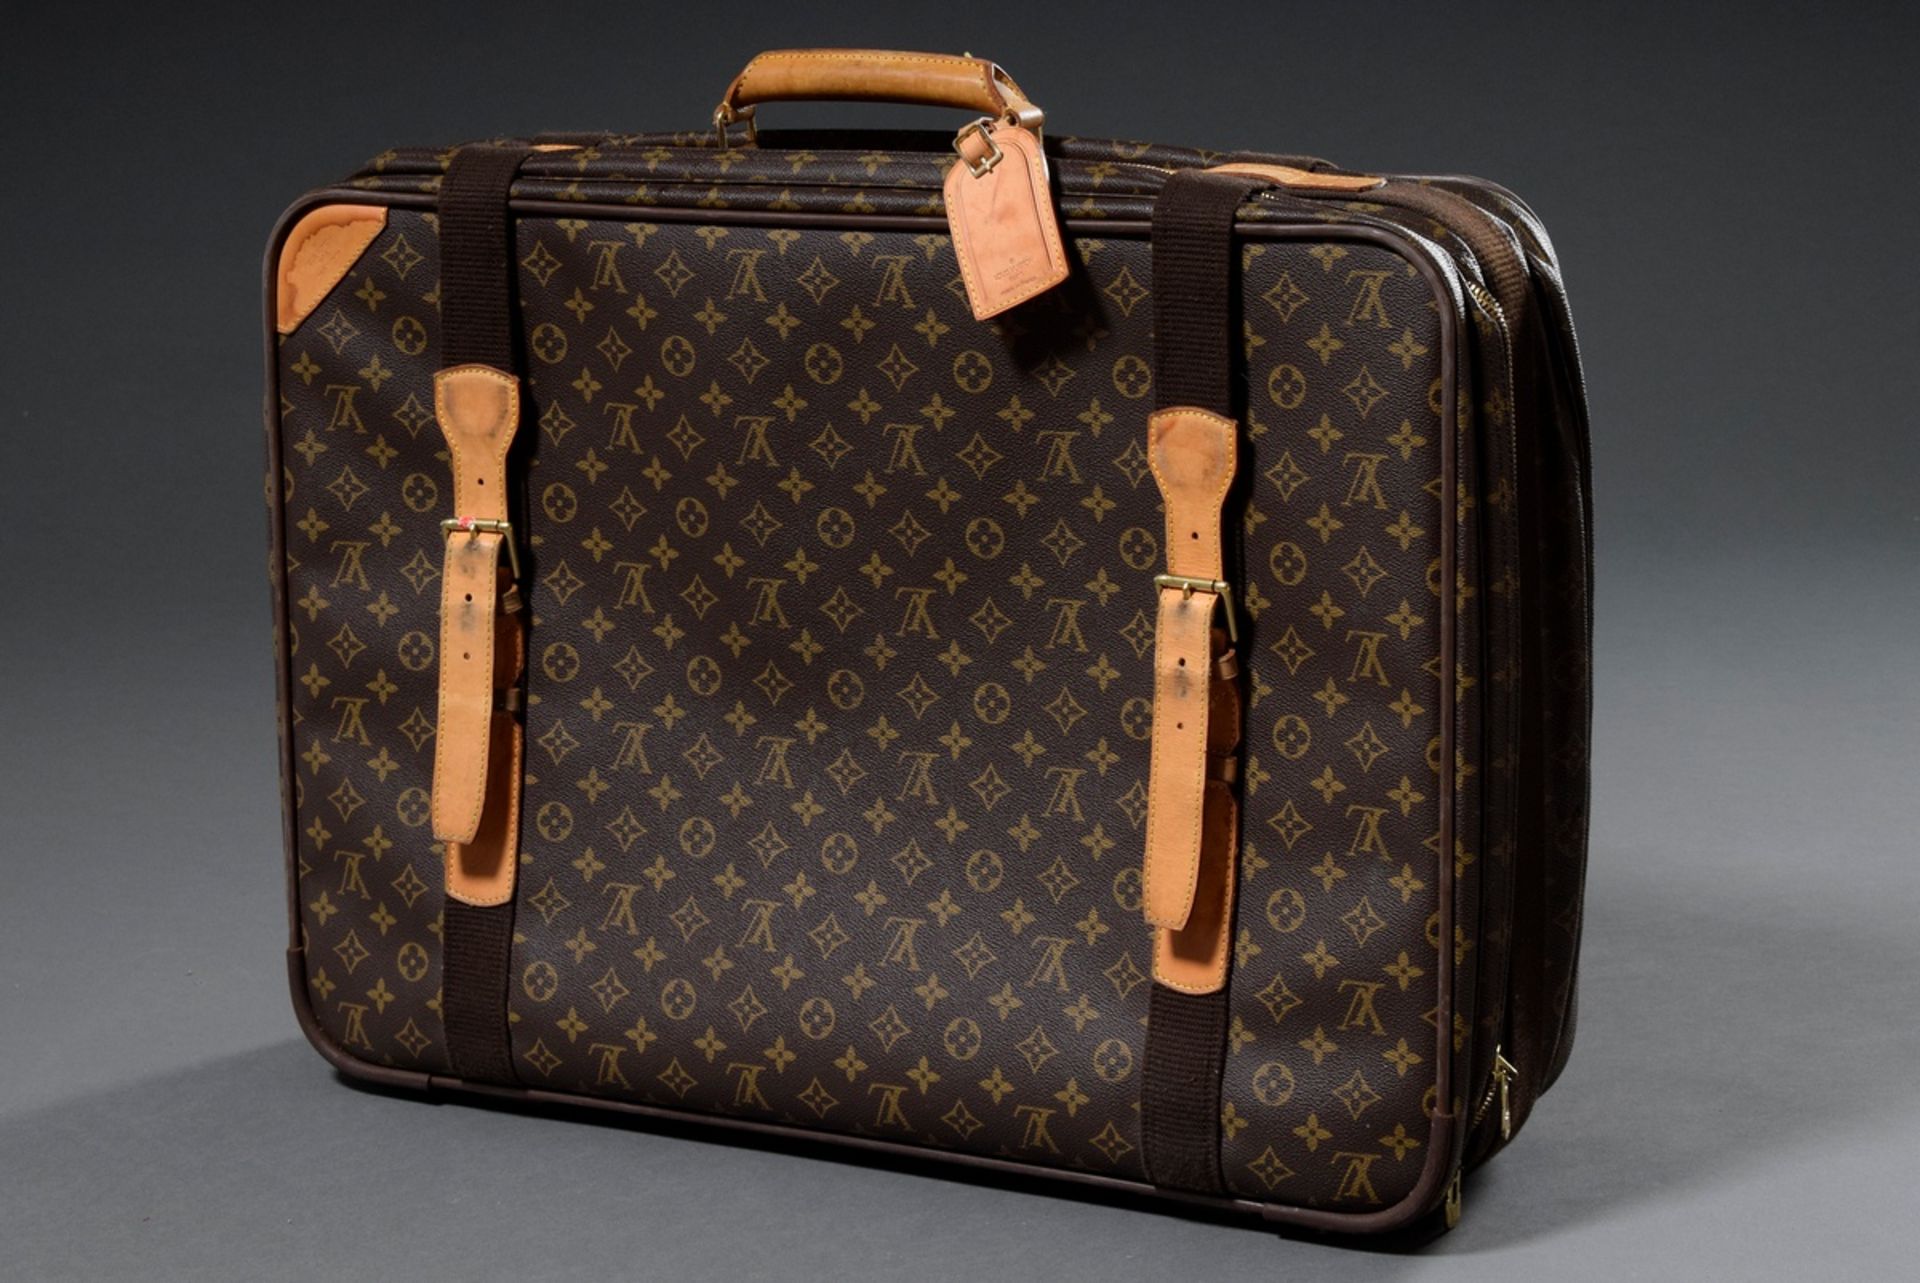 Louis Vuitton suitcase "Satellite 70" in monogrammed canvas with light cowhide details, gold-colour